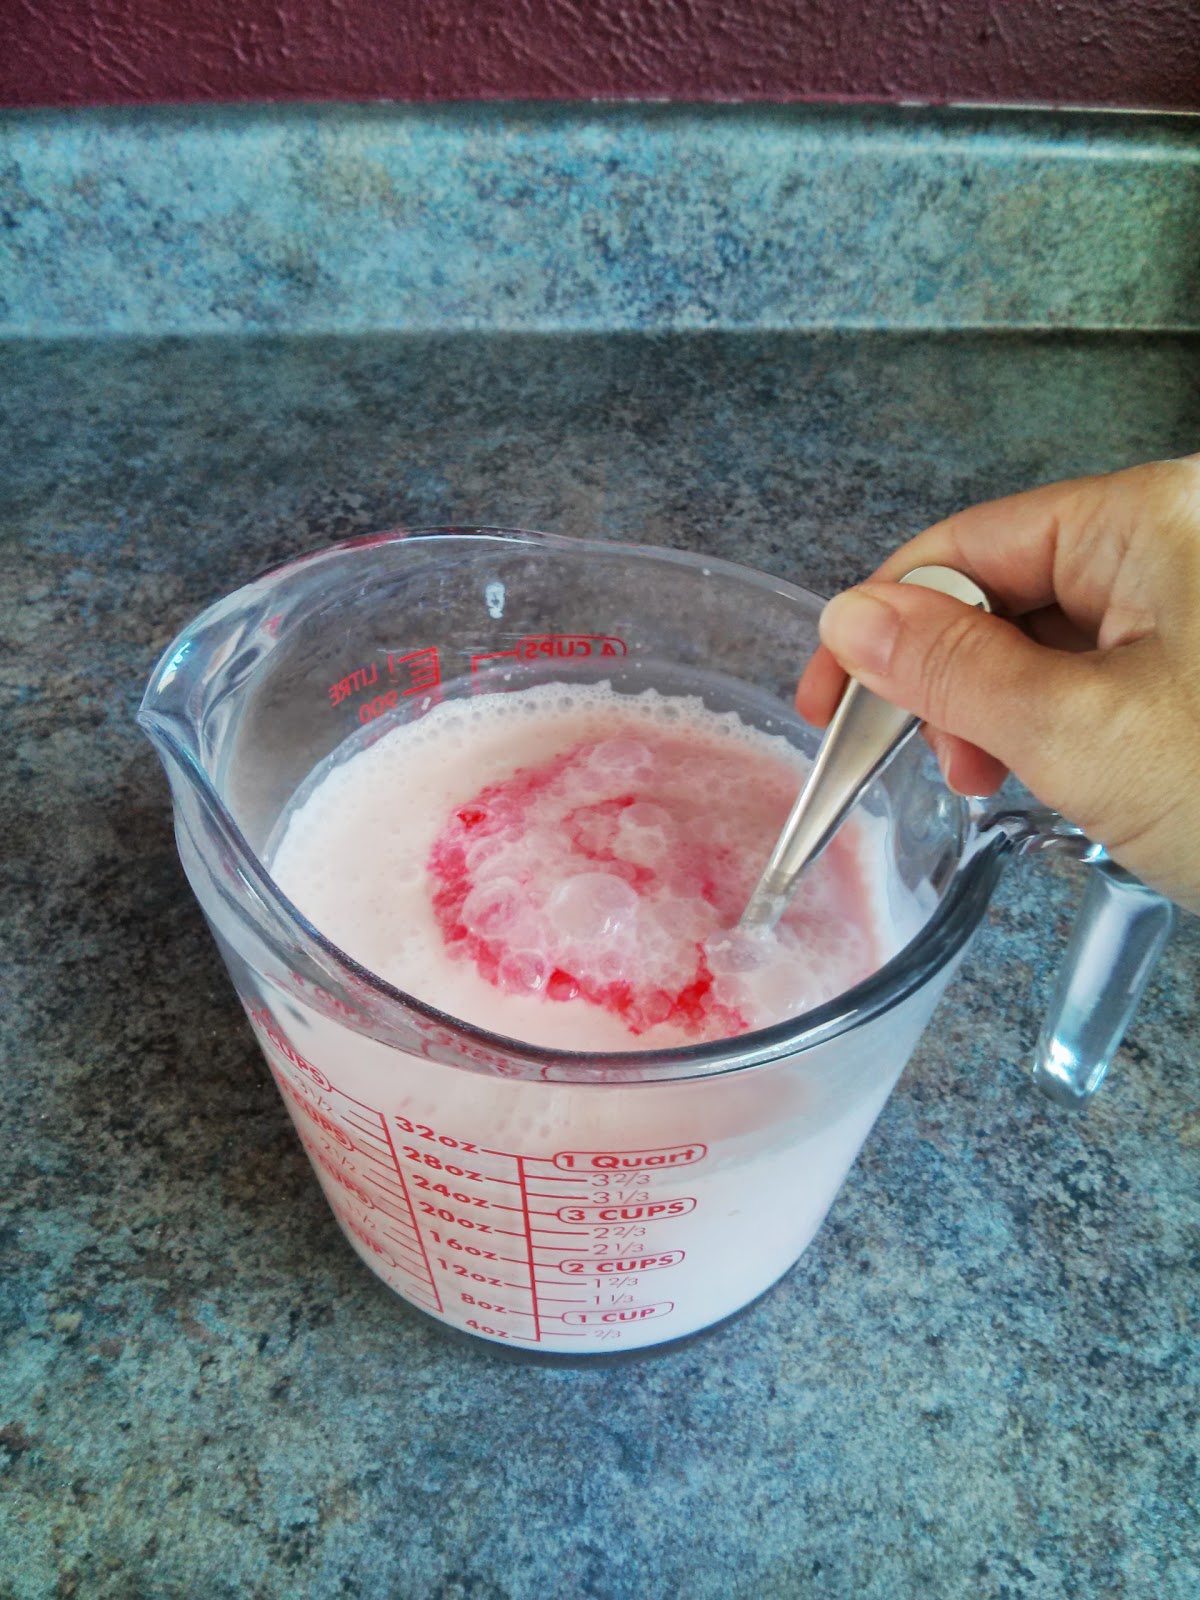 Mixing food coloring into sherbet mix to make it pink